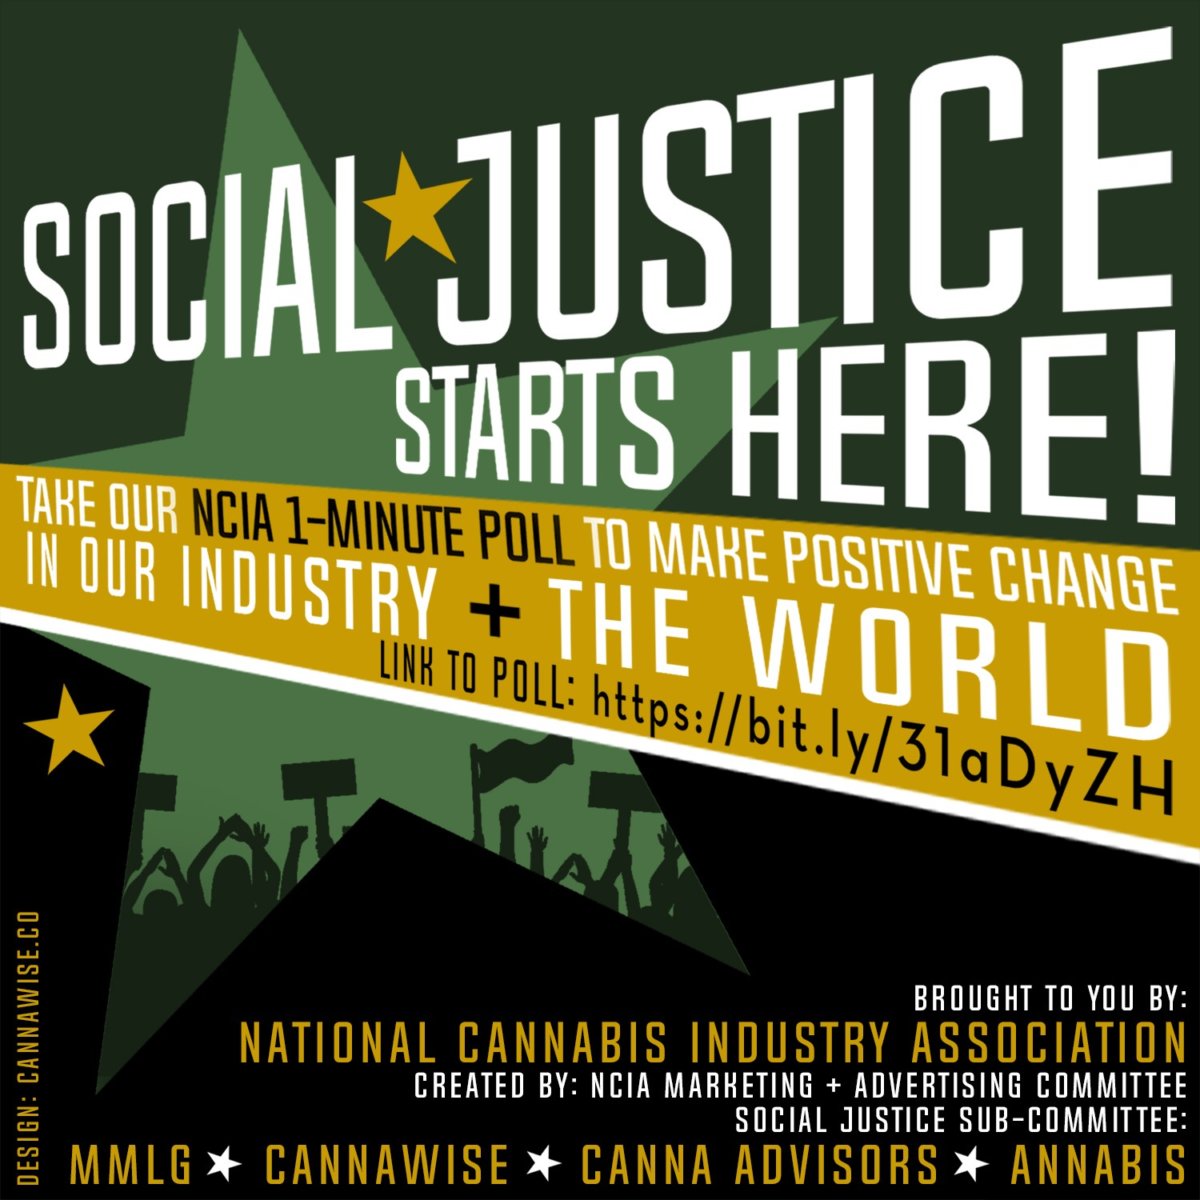 Committee Blog: Social Justice in the Cannabis Industry – Your Answers Will Take Minutes, But The Impact Could Be Long-Lasting